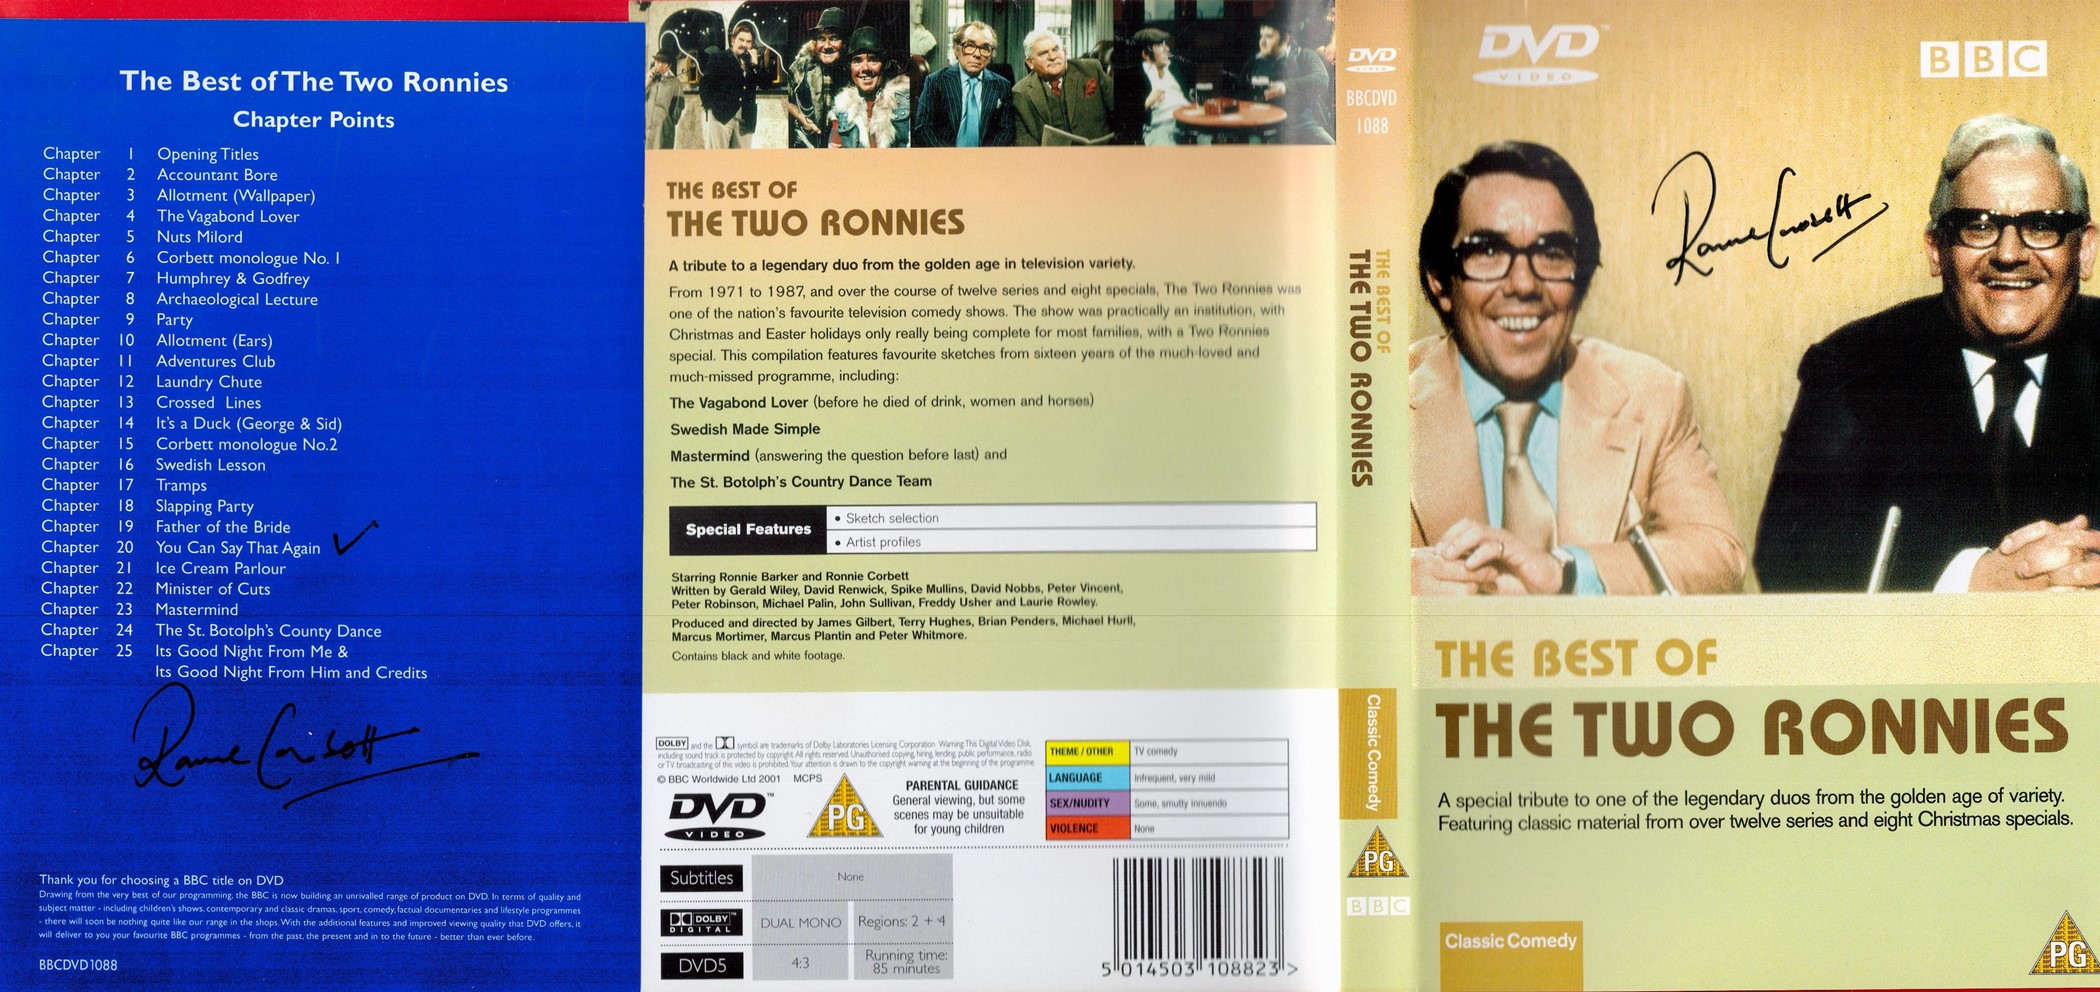 Ronnie Corbett Handsigned DVD Sleeve and Signed Chapter Guide titled The Best Of The Two Ronnies.